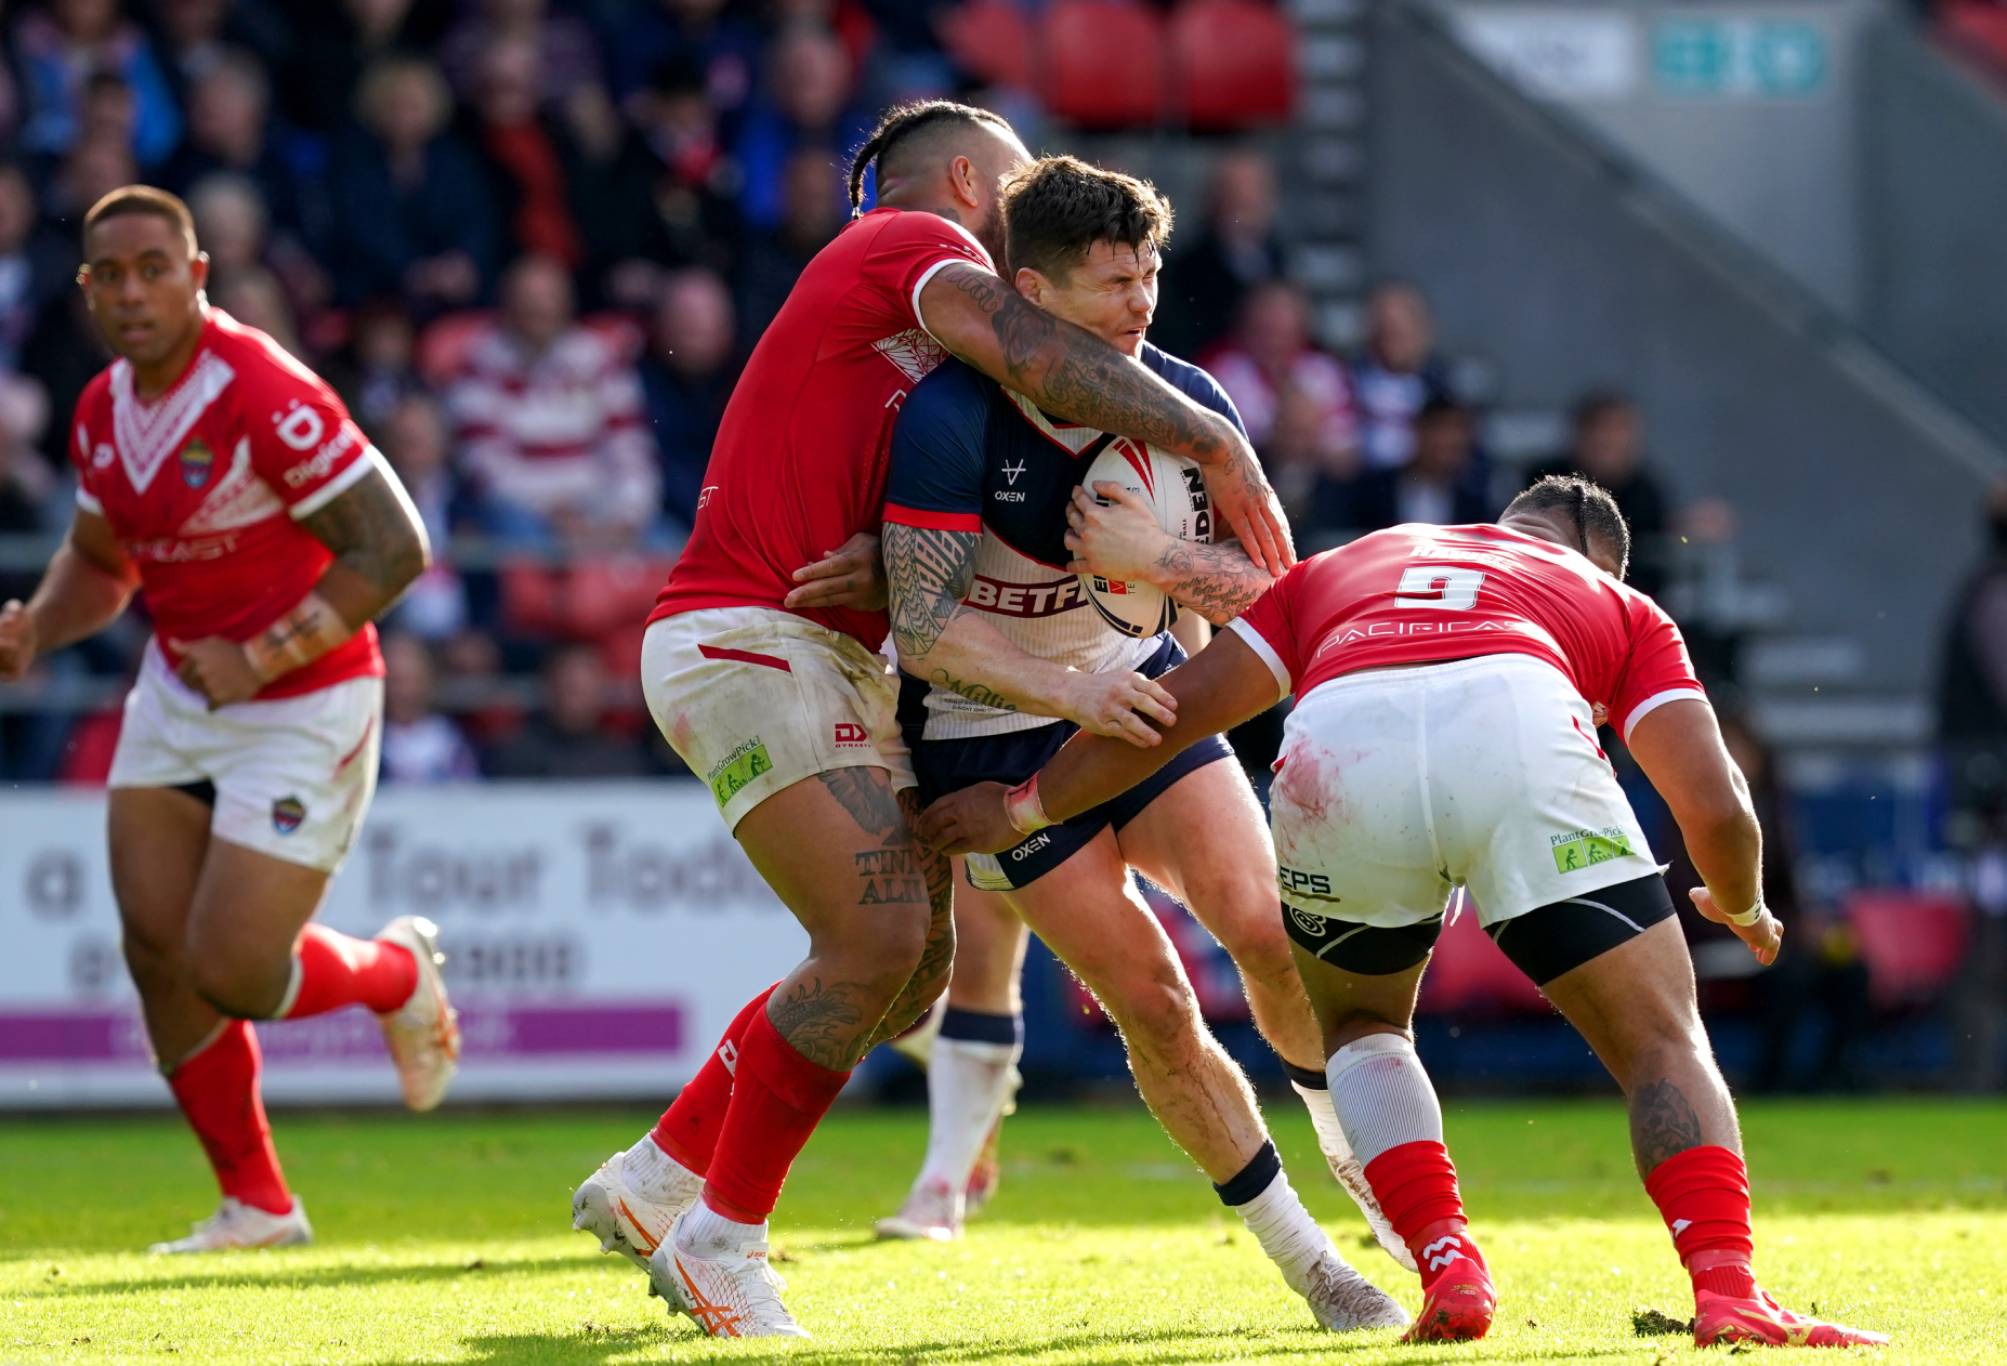 England's John Bateman is tackled by Tonga's Siliva Havili (right) and Addin Fonua-Blake during the International Test Series match at the Totally Wicked Stadium, St. Helens. Picture date: Sunday October 22, 2023. (Photo by Martin Rickett/PA Images via Getty Images)